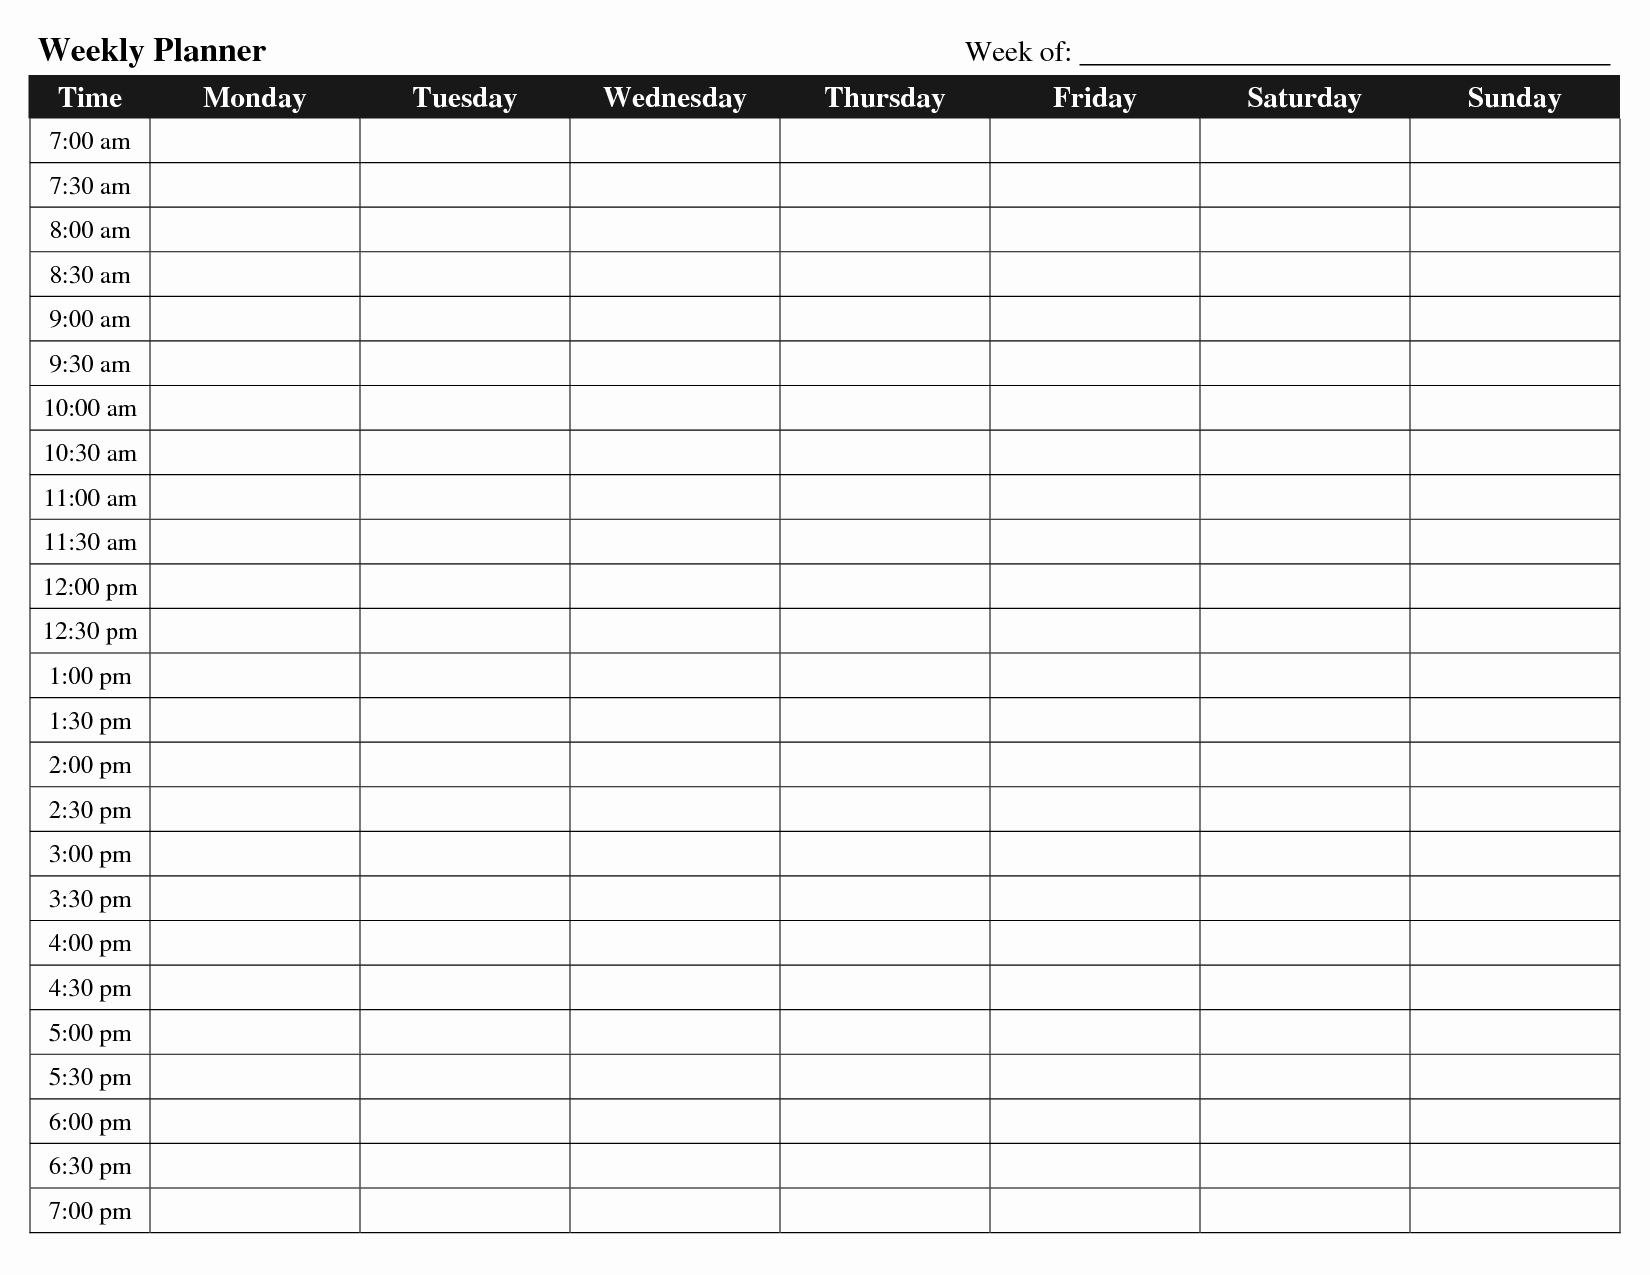 Weekly Schedule Template Ideas Calendar With Time Slots Free | Smorad regarding Weekly Calendar With Time Slots